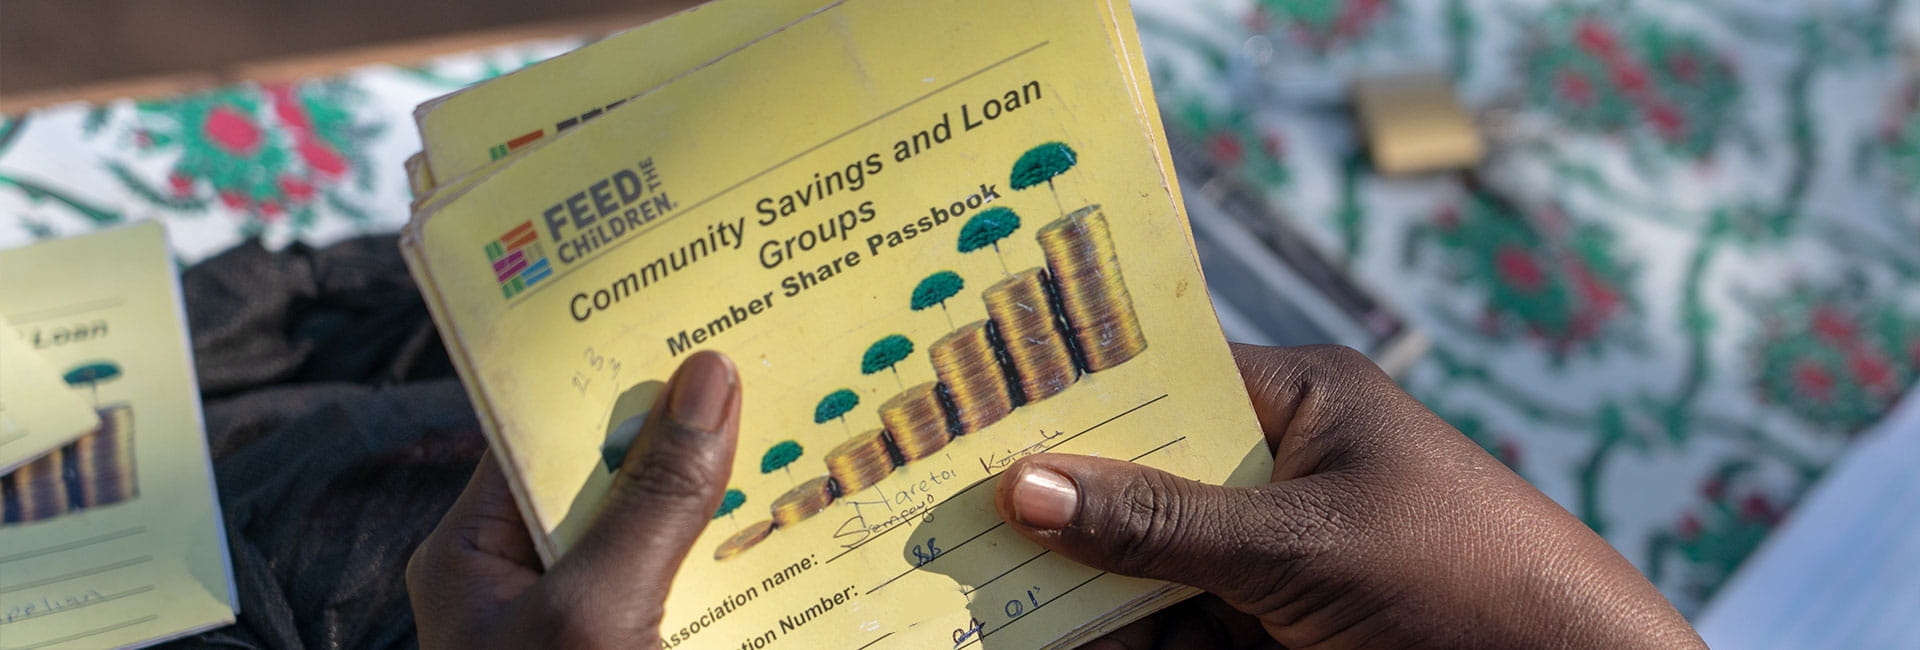 A person holding a pamphlet about the feed the children community savings and loan groups